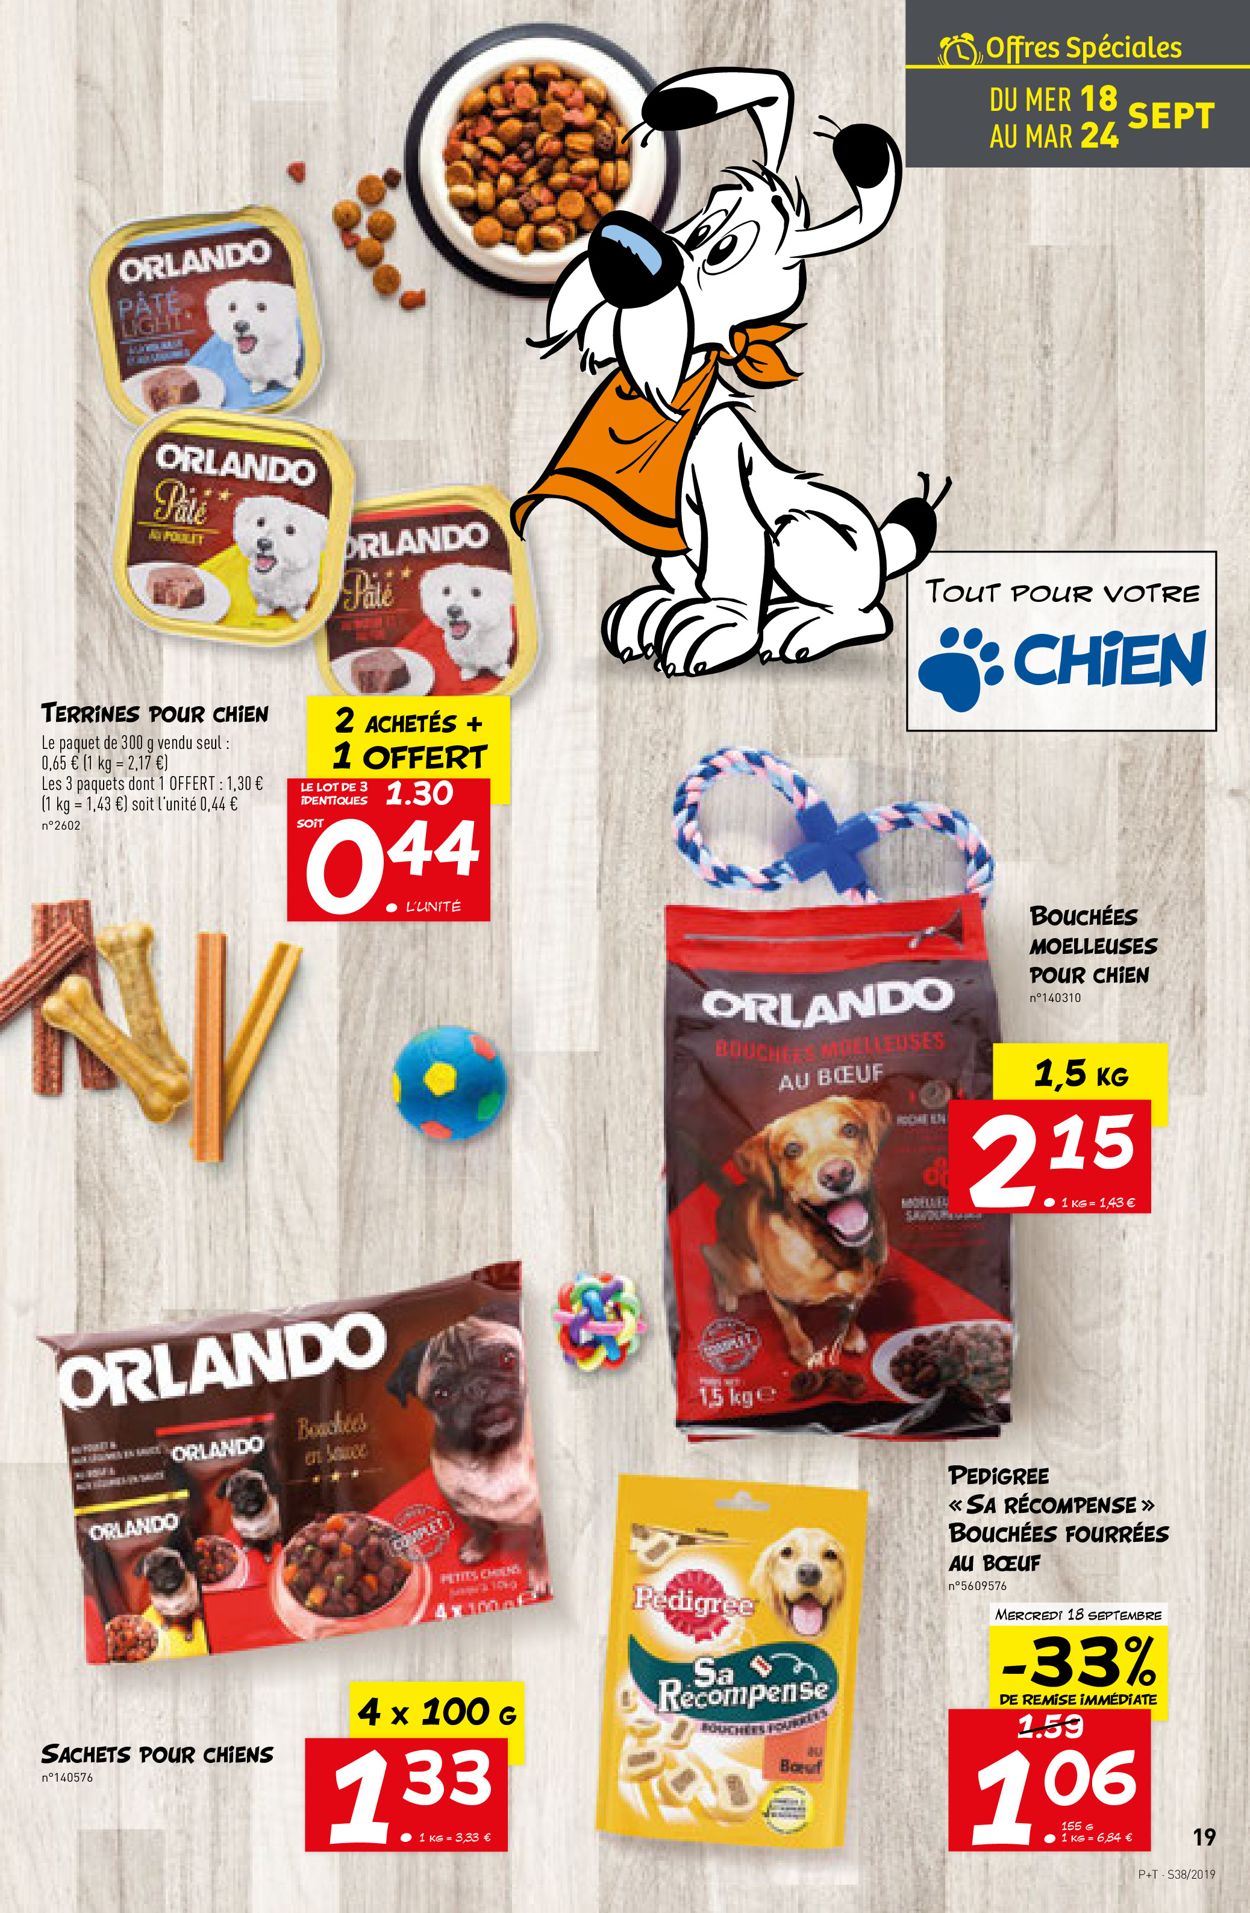 Lidl Catalogue - 18.09-24.09.2019 (Page 19)